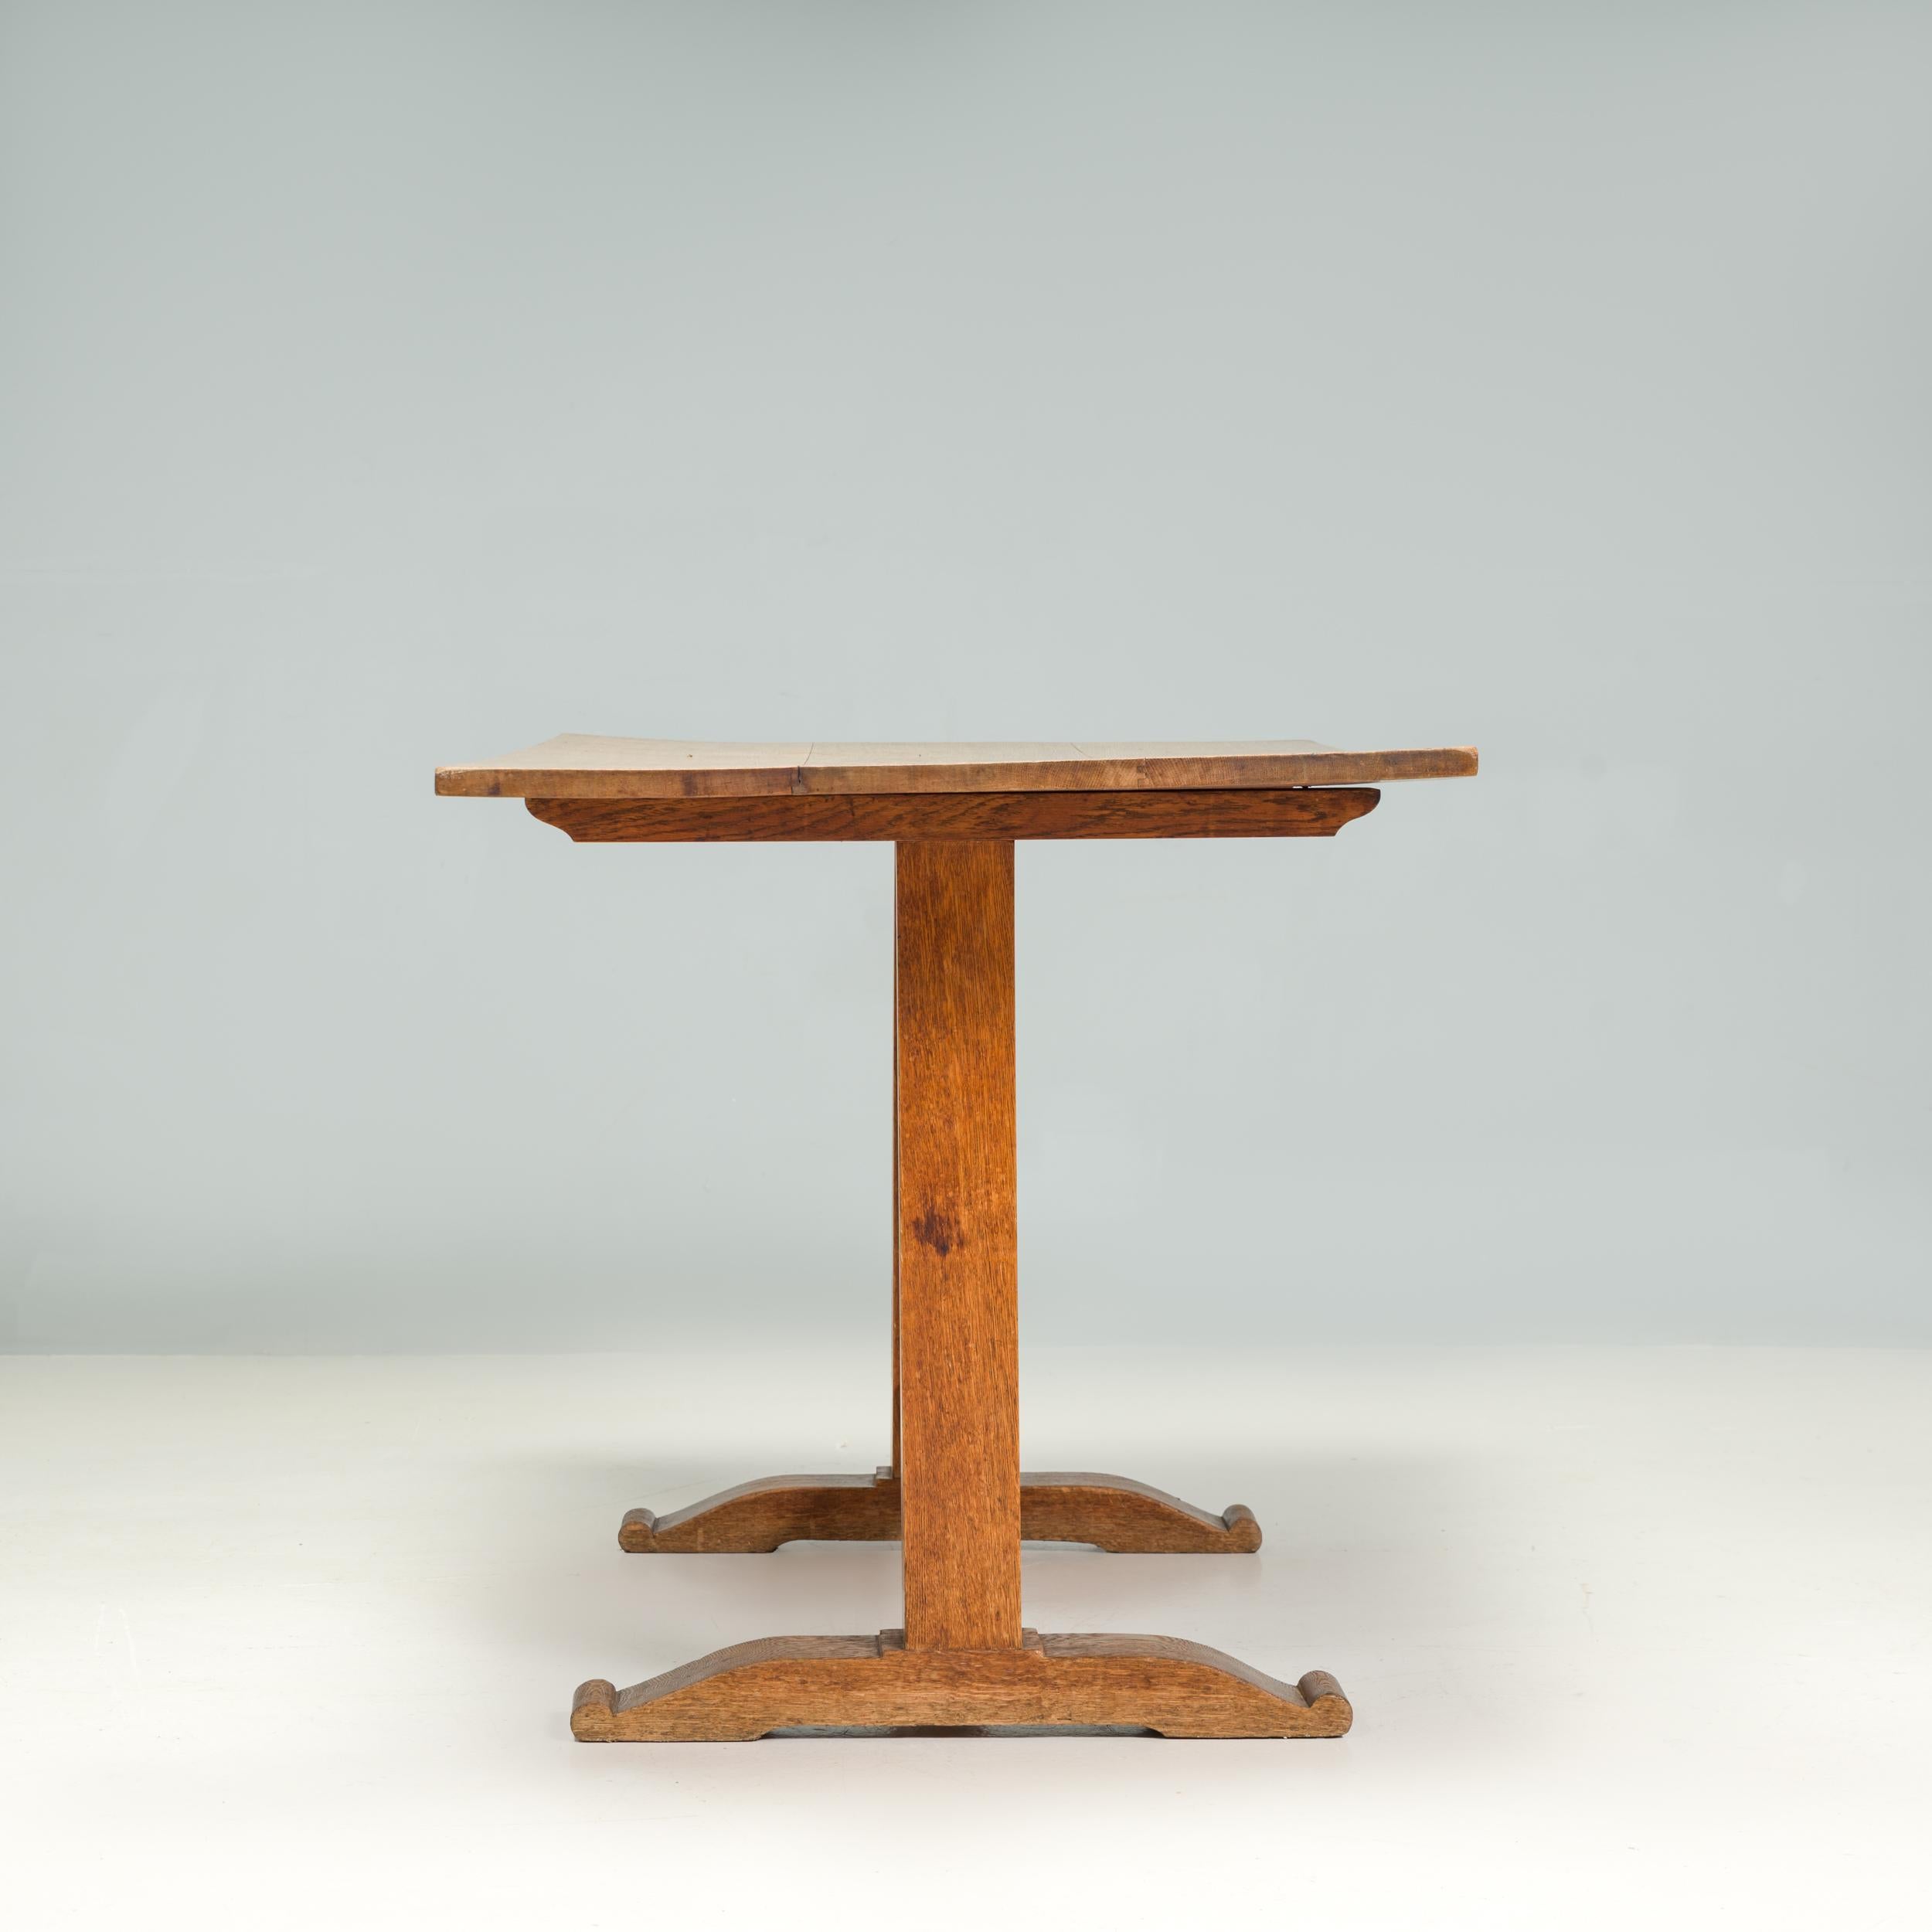 A beautifully constructed wooden refectory table in the Arts & Crafts style.

The table has a traditional aesthetic, with a wonderfully worn down rectangular table top made up of several planks of wood.

The plinth style legs have carved feet and a